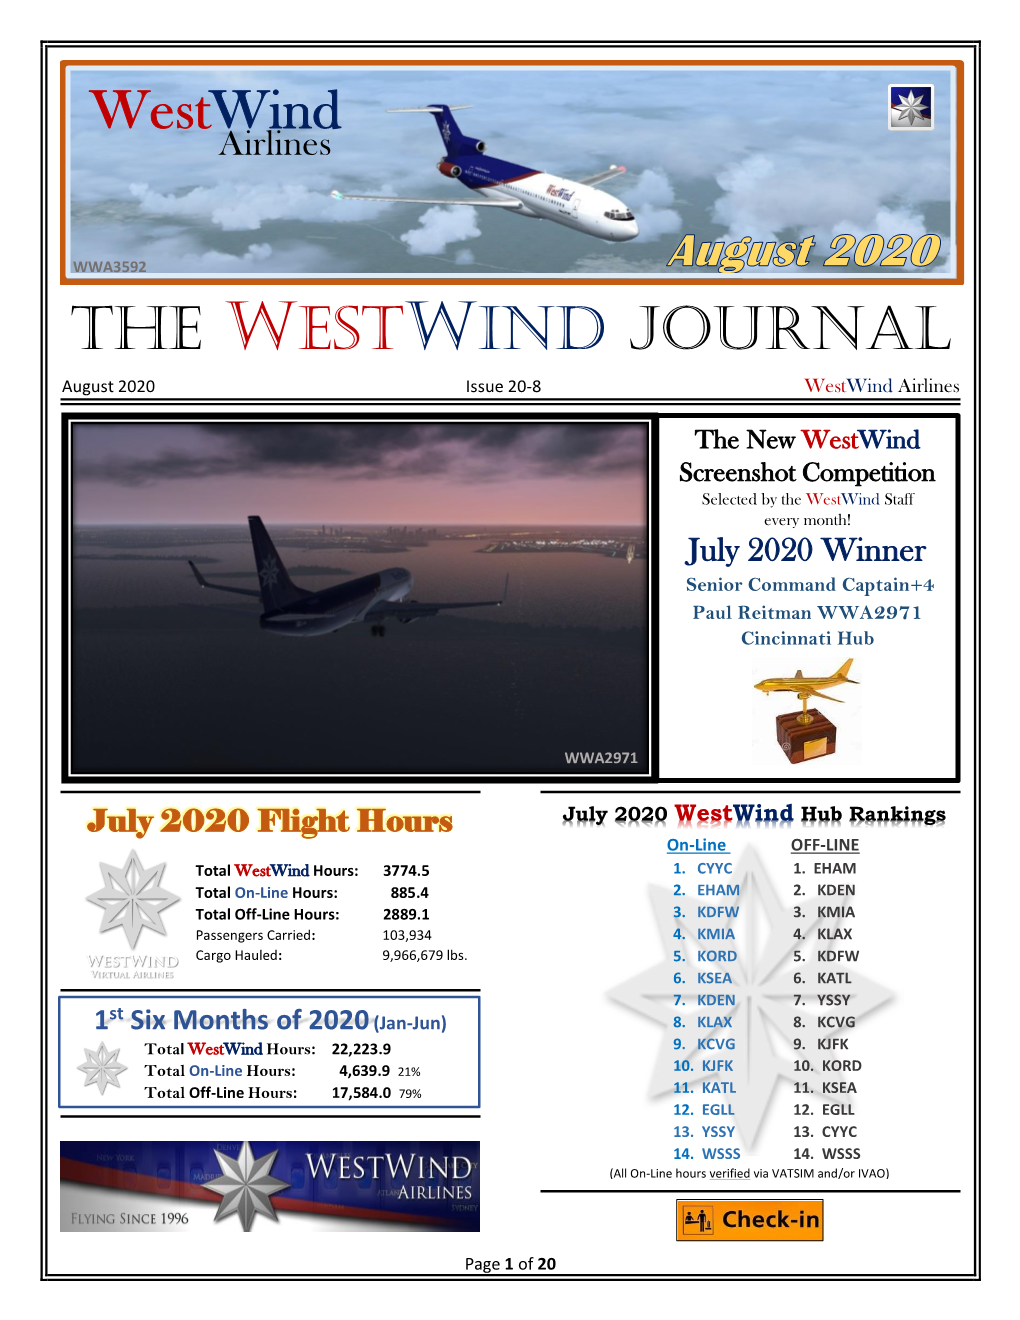 The Westwind Journal